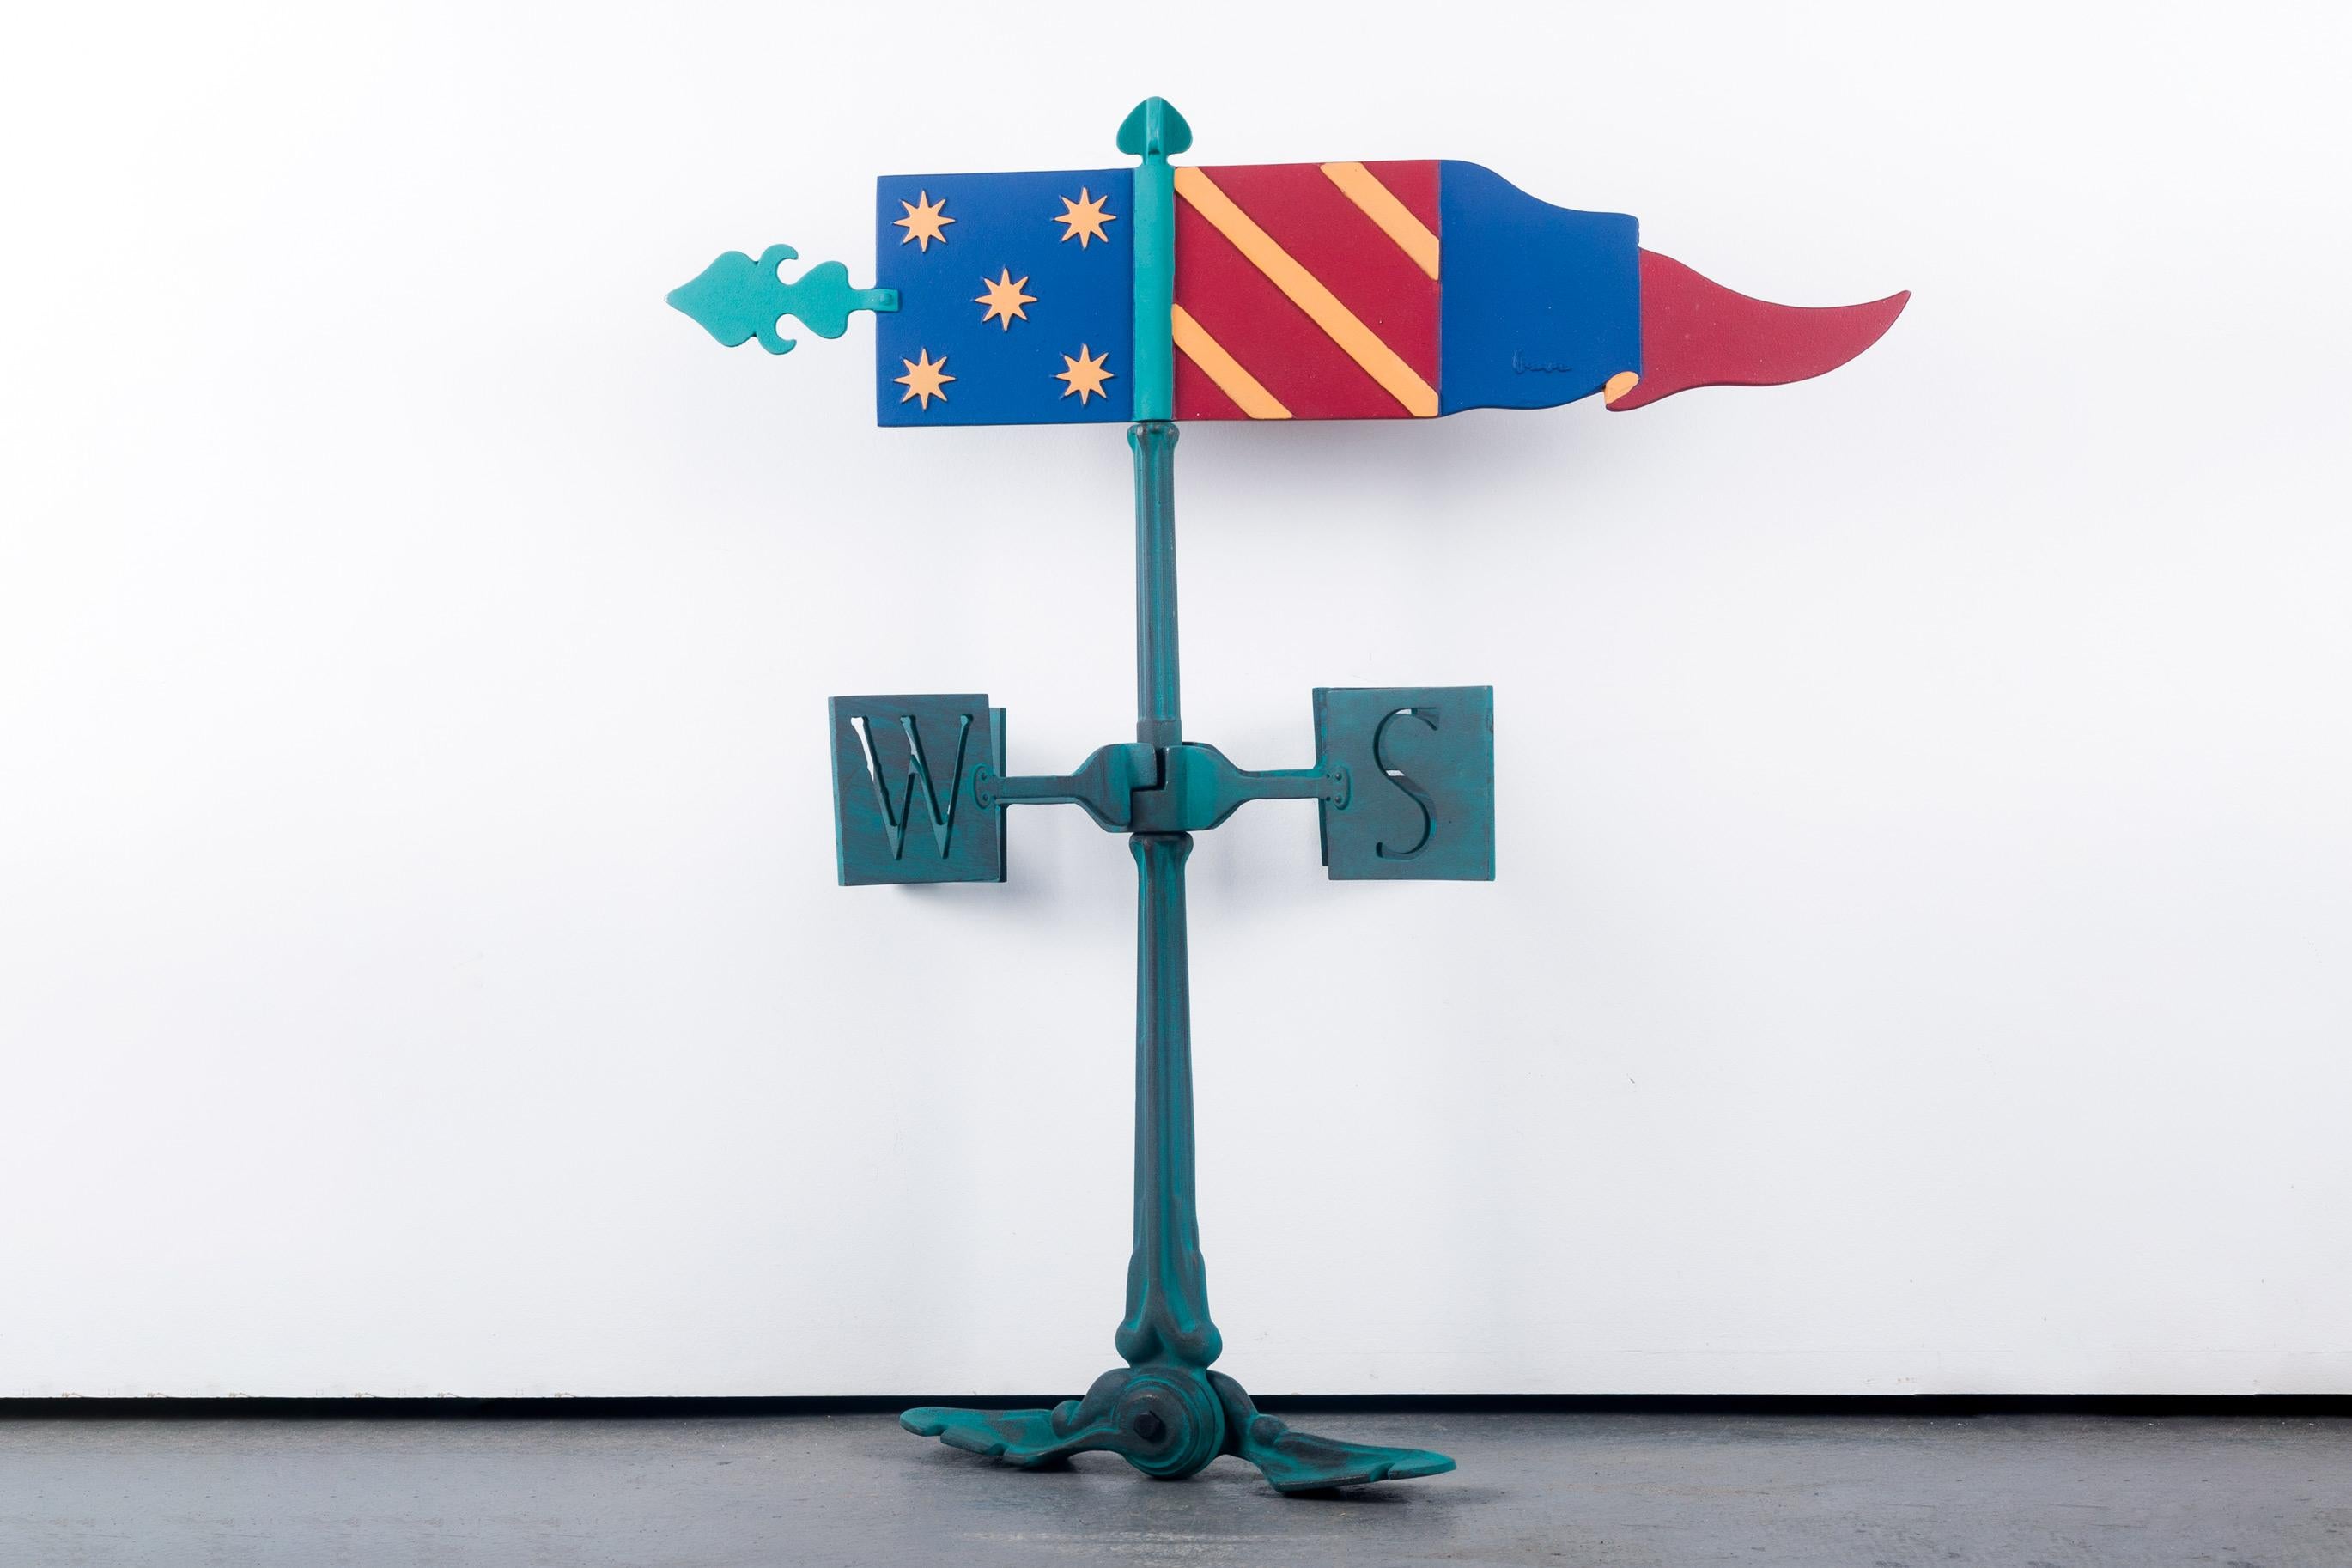 Very rare Michael Graves weather vane for the Markuse Corp, USA. New in box with manual. Cast aluminum painted in blue, yellow, red and celadon.

The Markuse Corporation is well known in the postmodern field for their remarkable mailboxes created